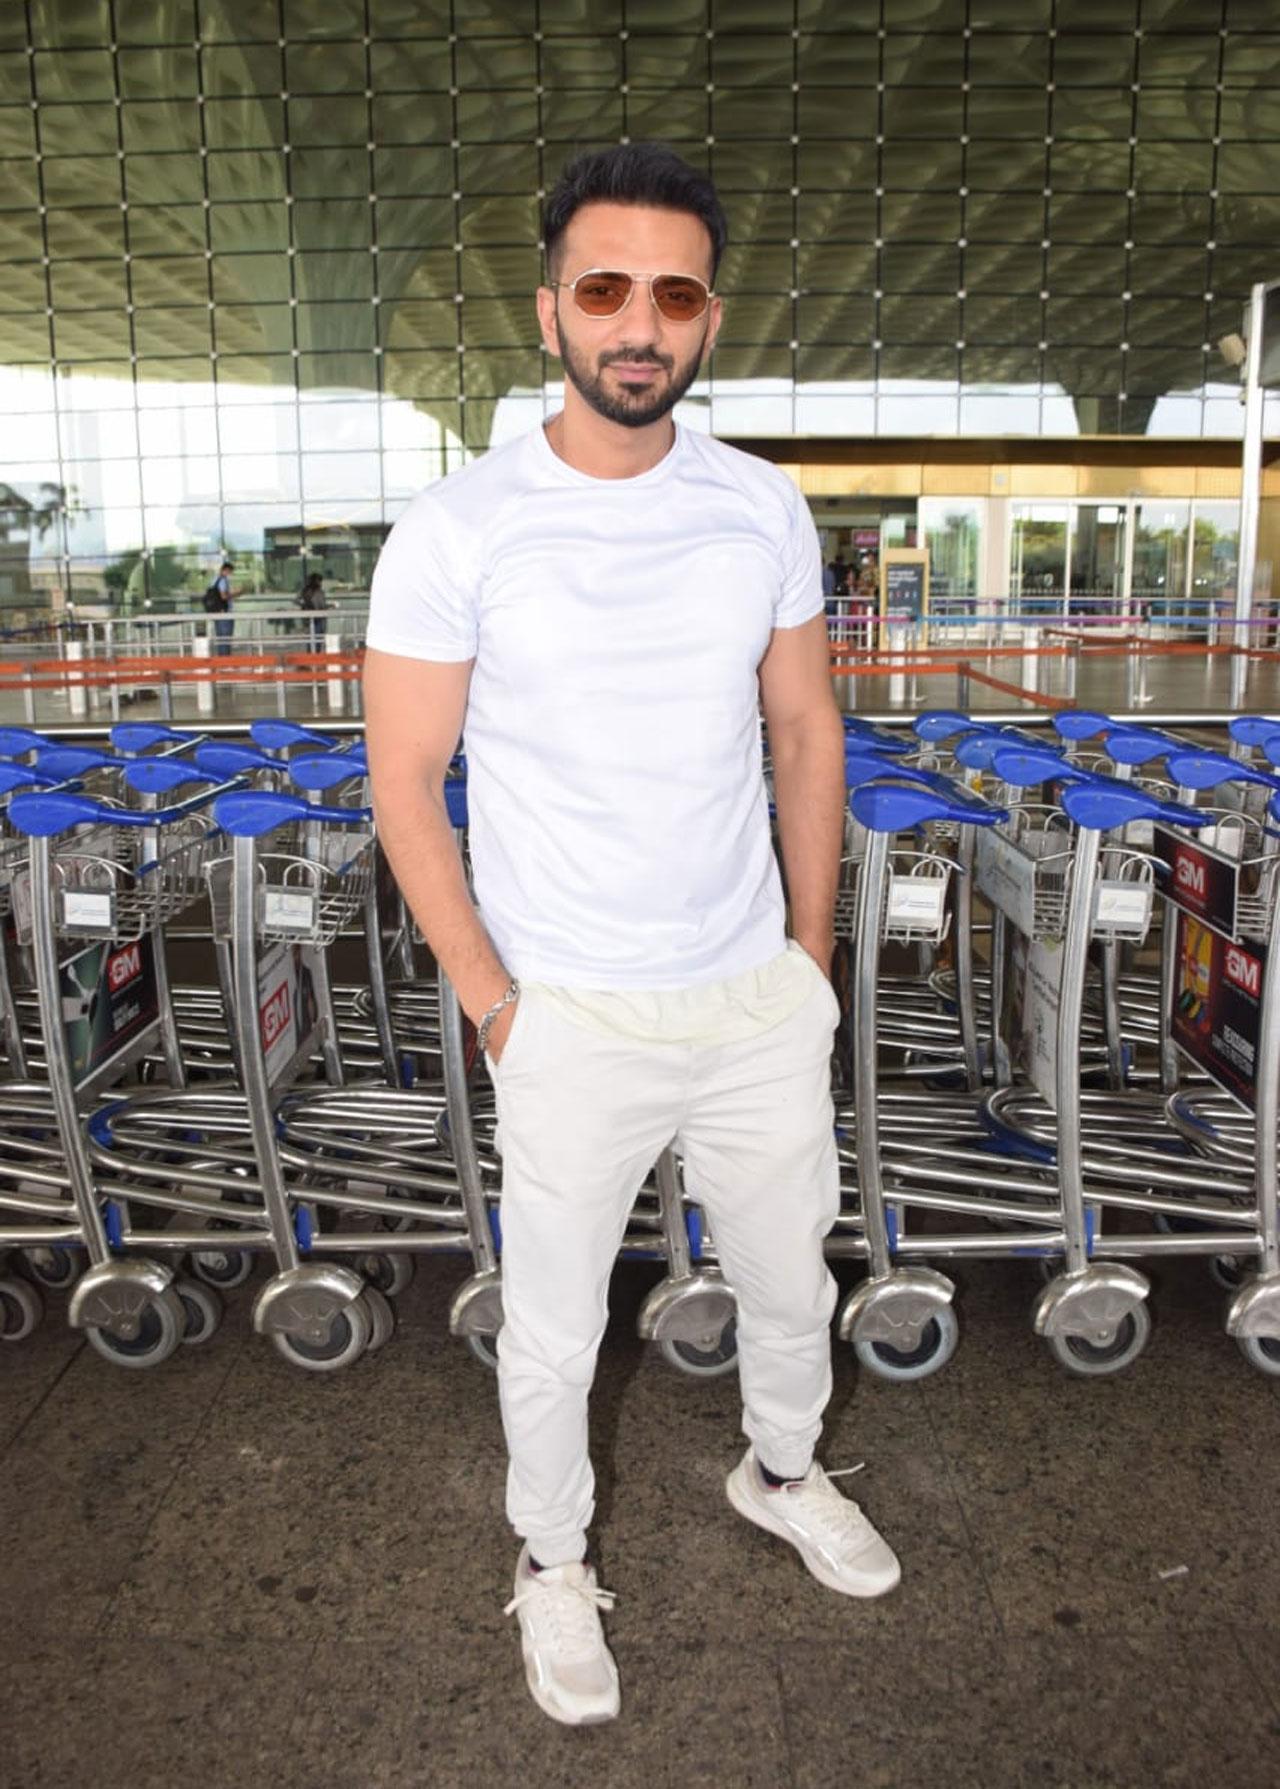 Ali Merchant looked dapper in his outfit at the airport. Back in 2016, Preity Zinta surprised Ali and his wife Anam when she dropped in for one of their wedding functions. Preity’s appearance came as a big surprise for Ali who knows her well.